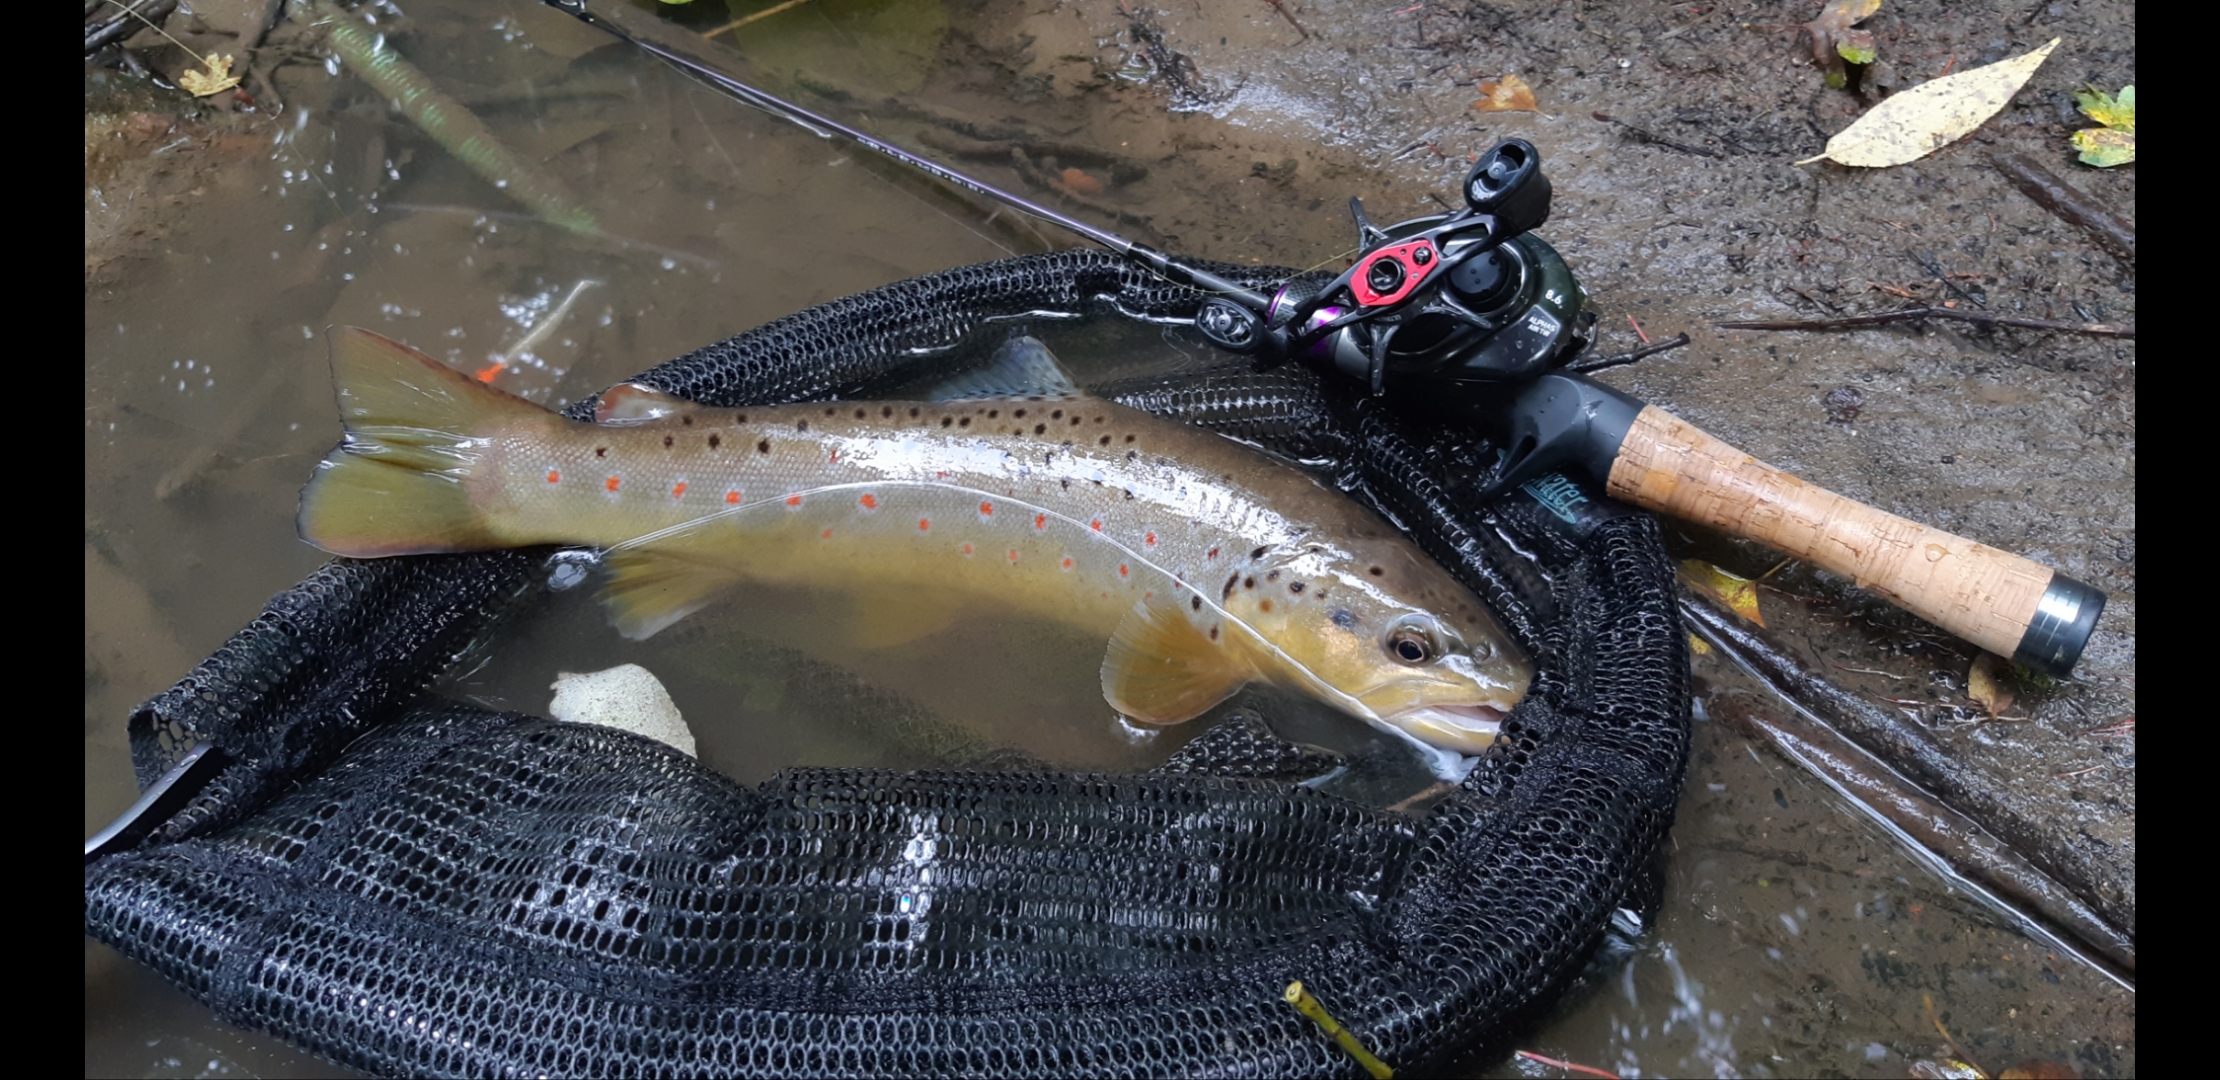 Daiwa Alphas Air TW 20 responsible for a lovely trout capture